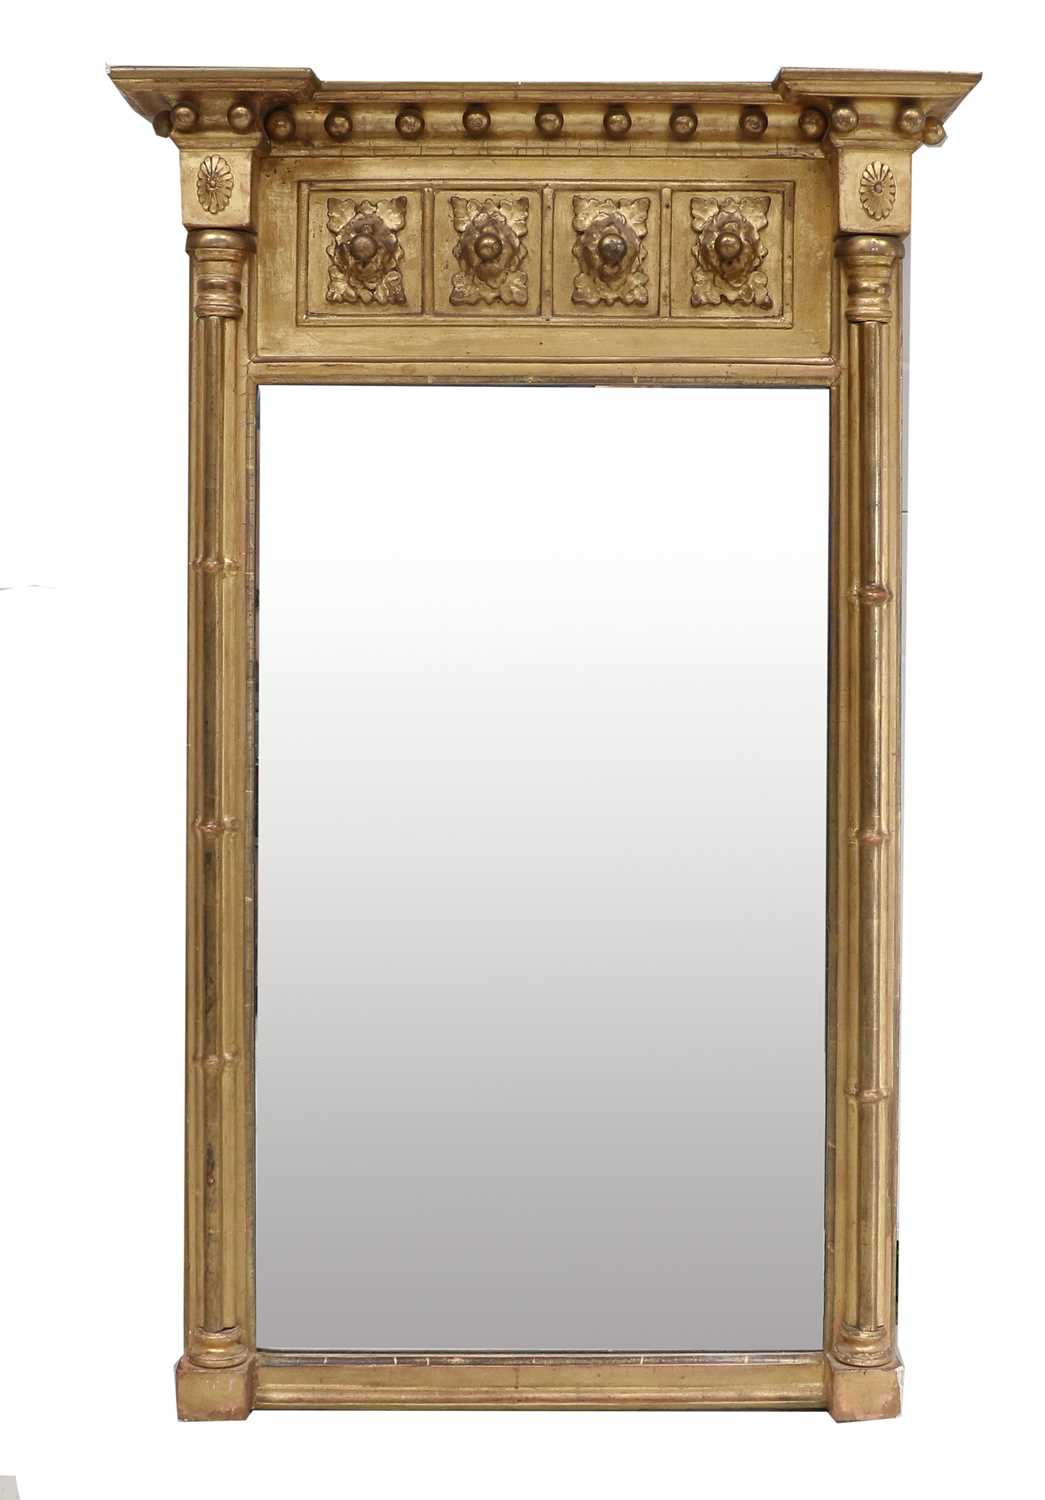 A Regency Gilt and Gesso Pier Glass, early 19th century, the later plain mirror plate between